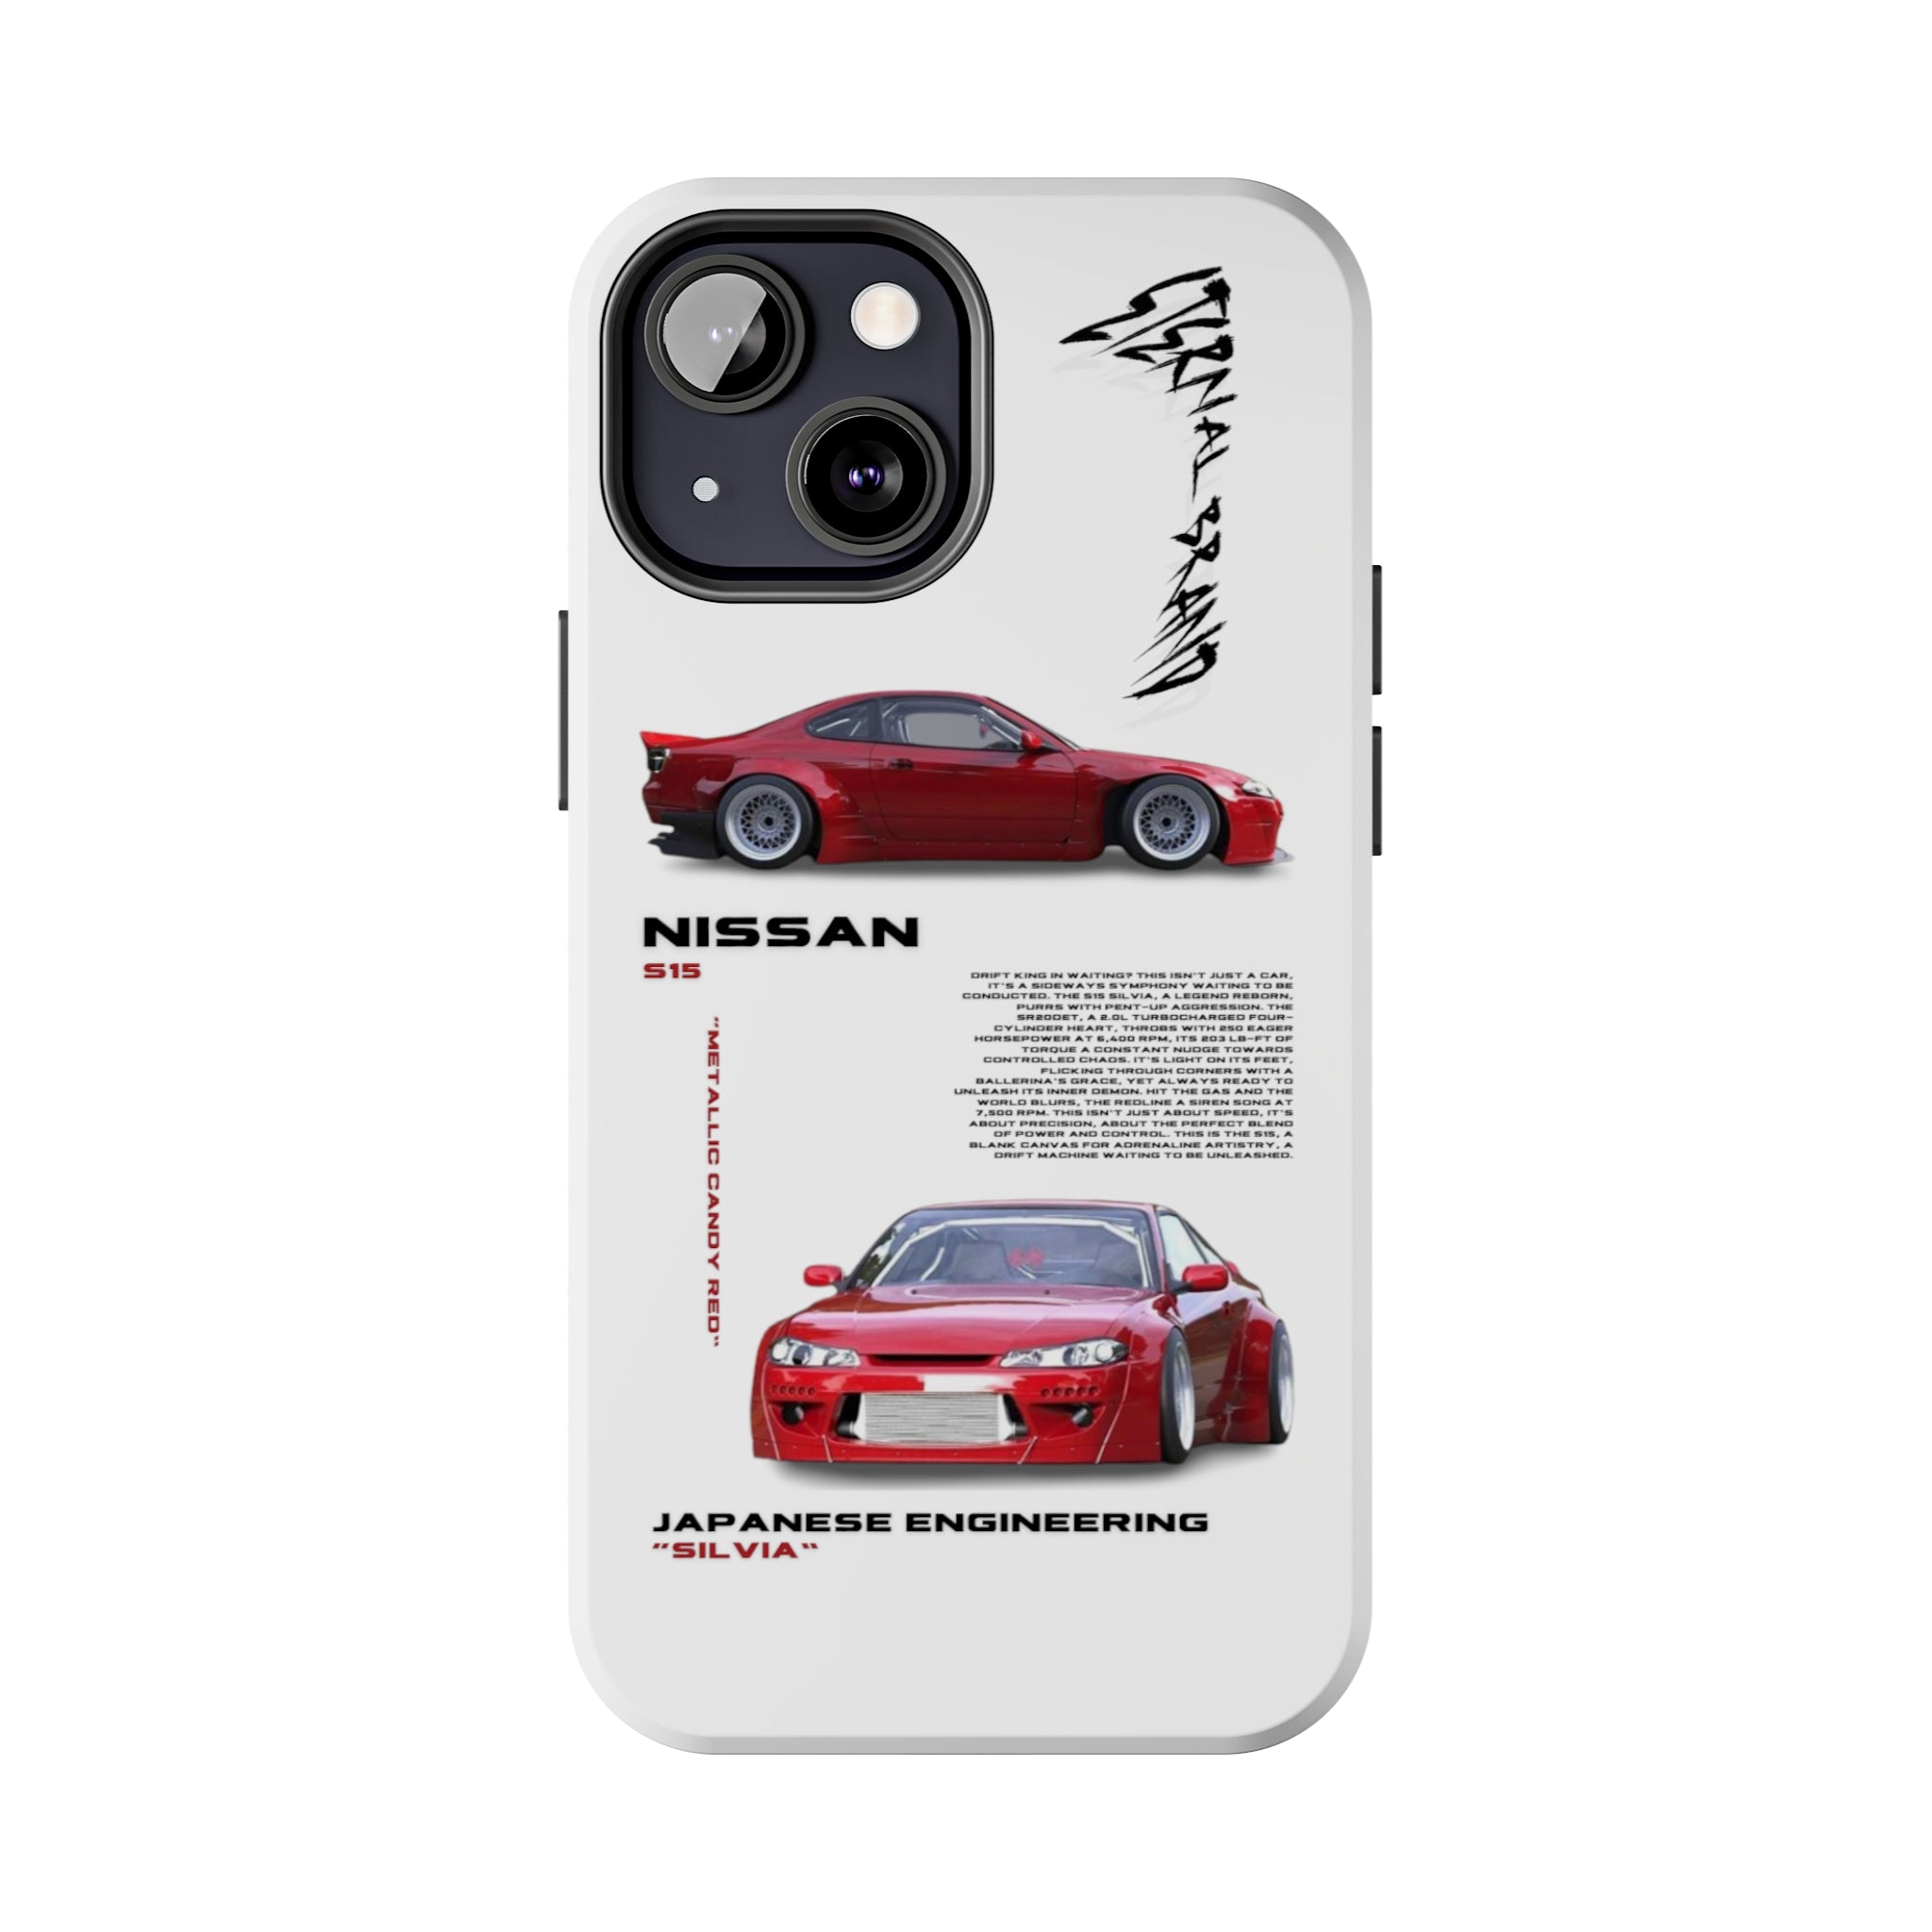 Nissan s15 Silvia "Candy Red" "White"